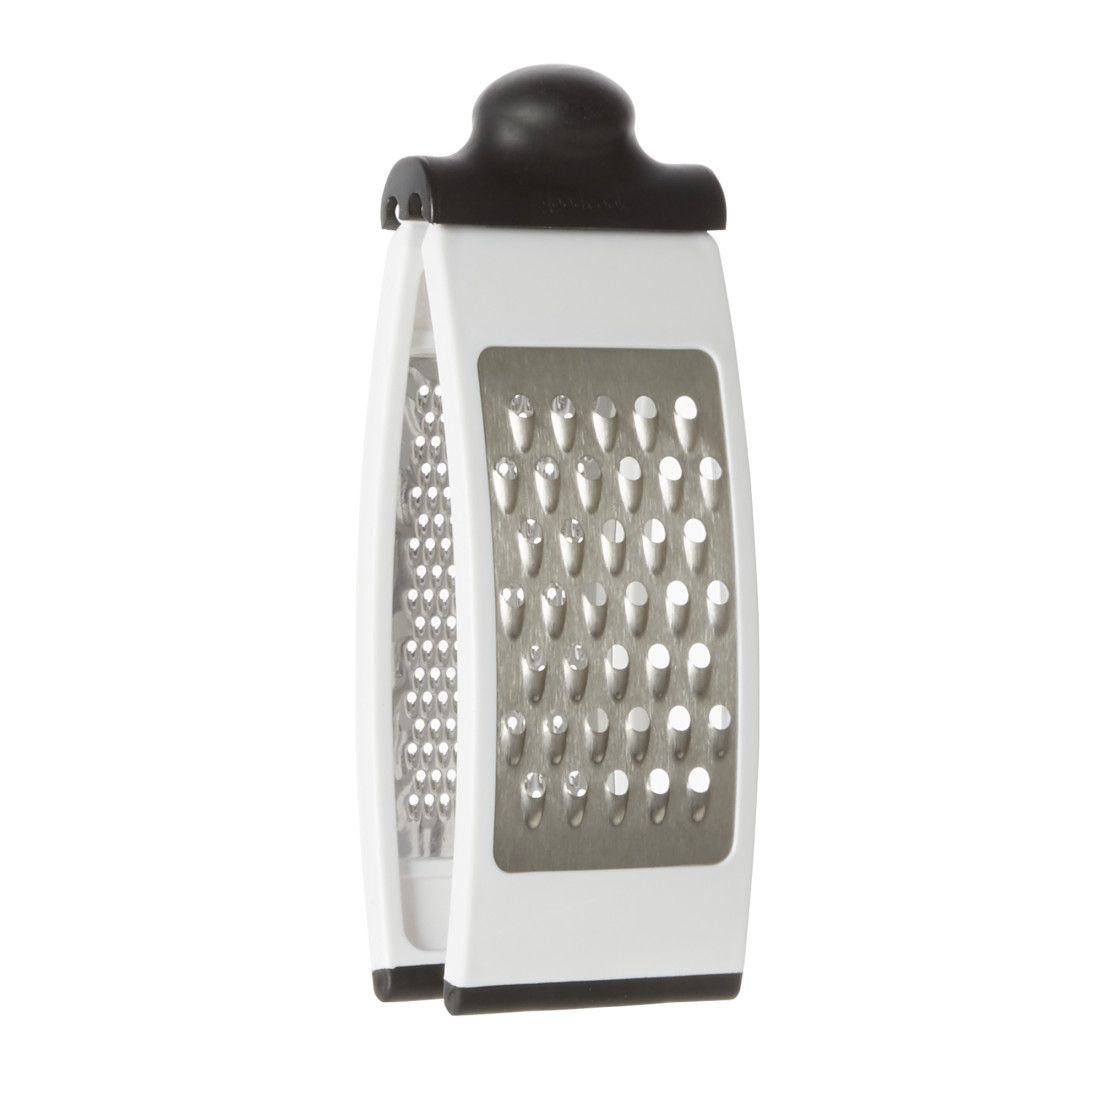 OXO Good Grips Multi-Grater & Reviews